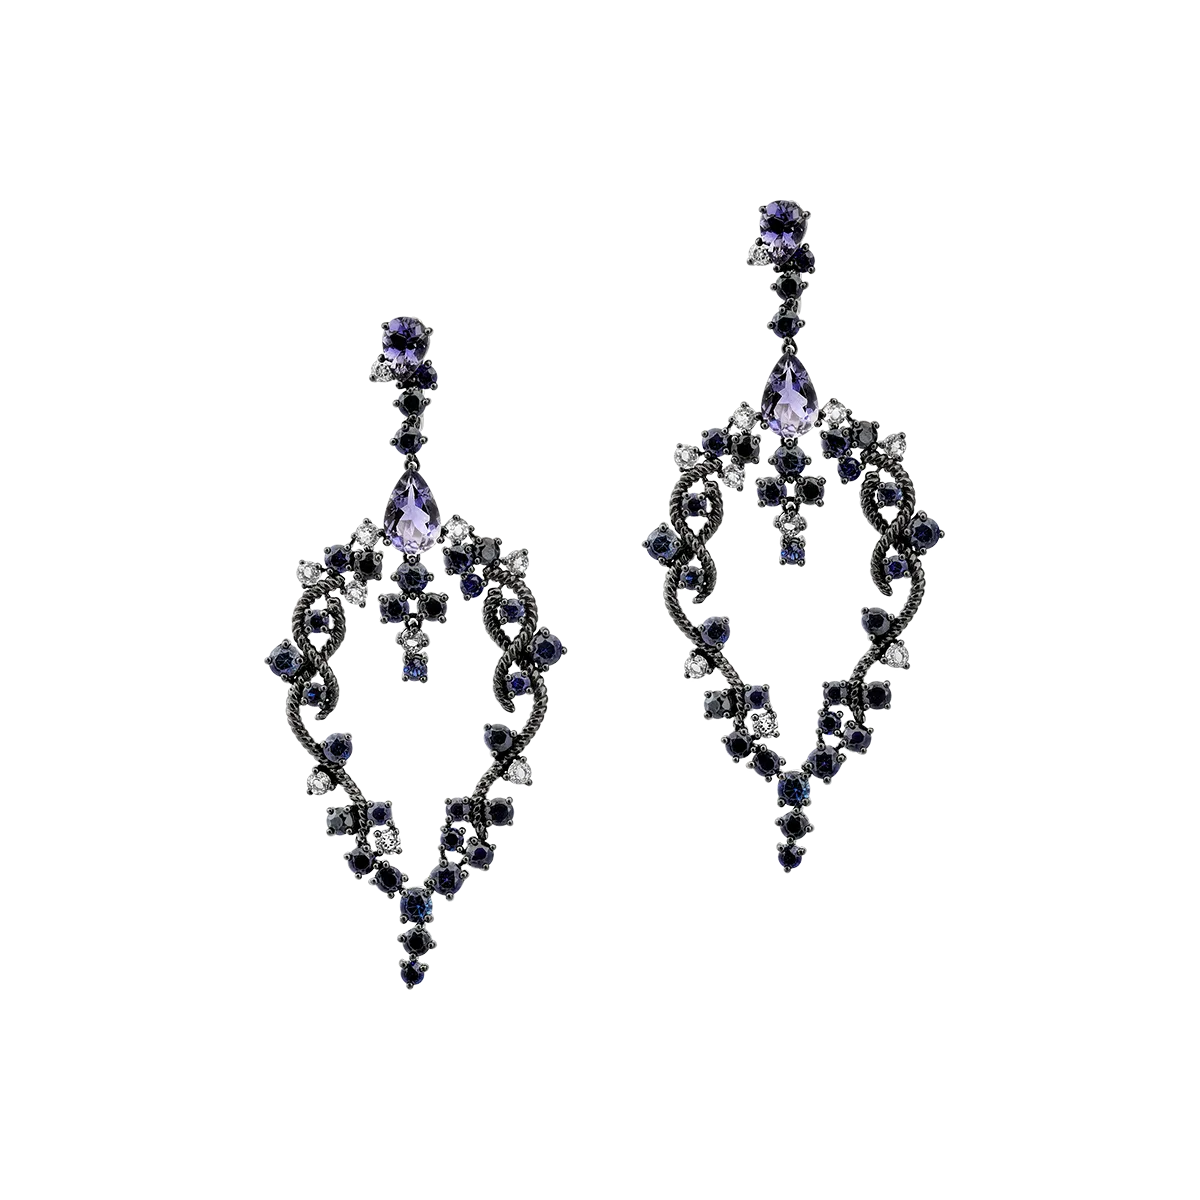 14K black and white gold earrings with 15.02ct precious and semi-precious stones